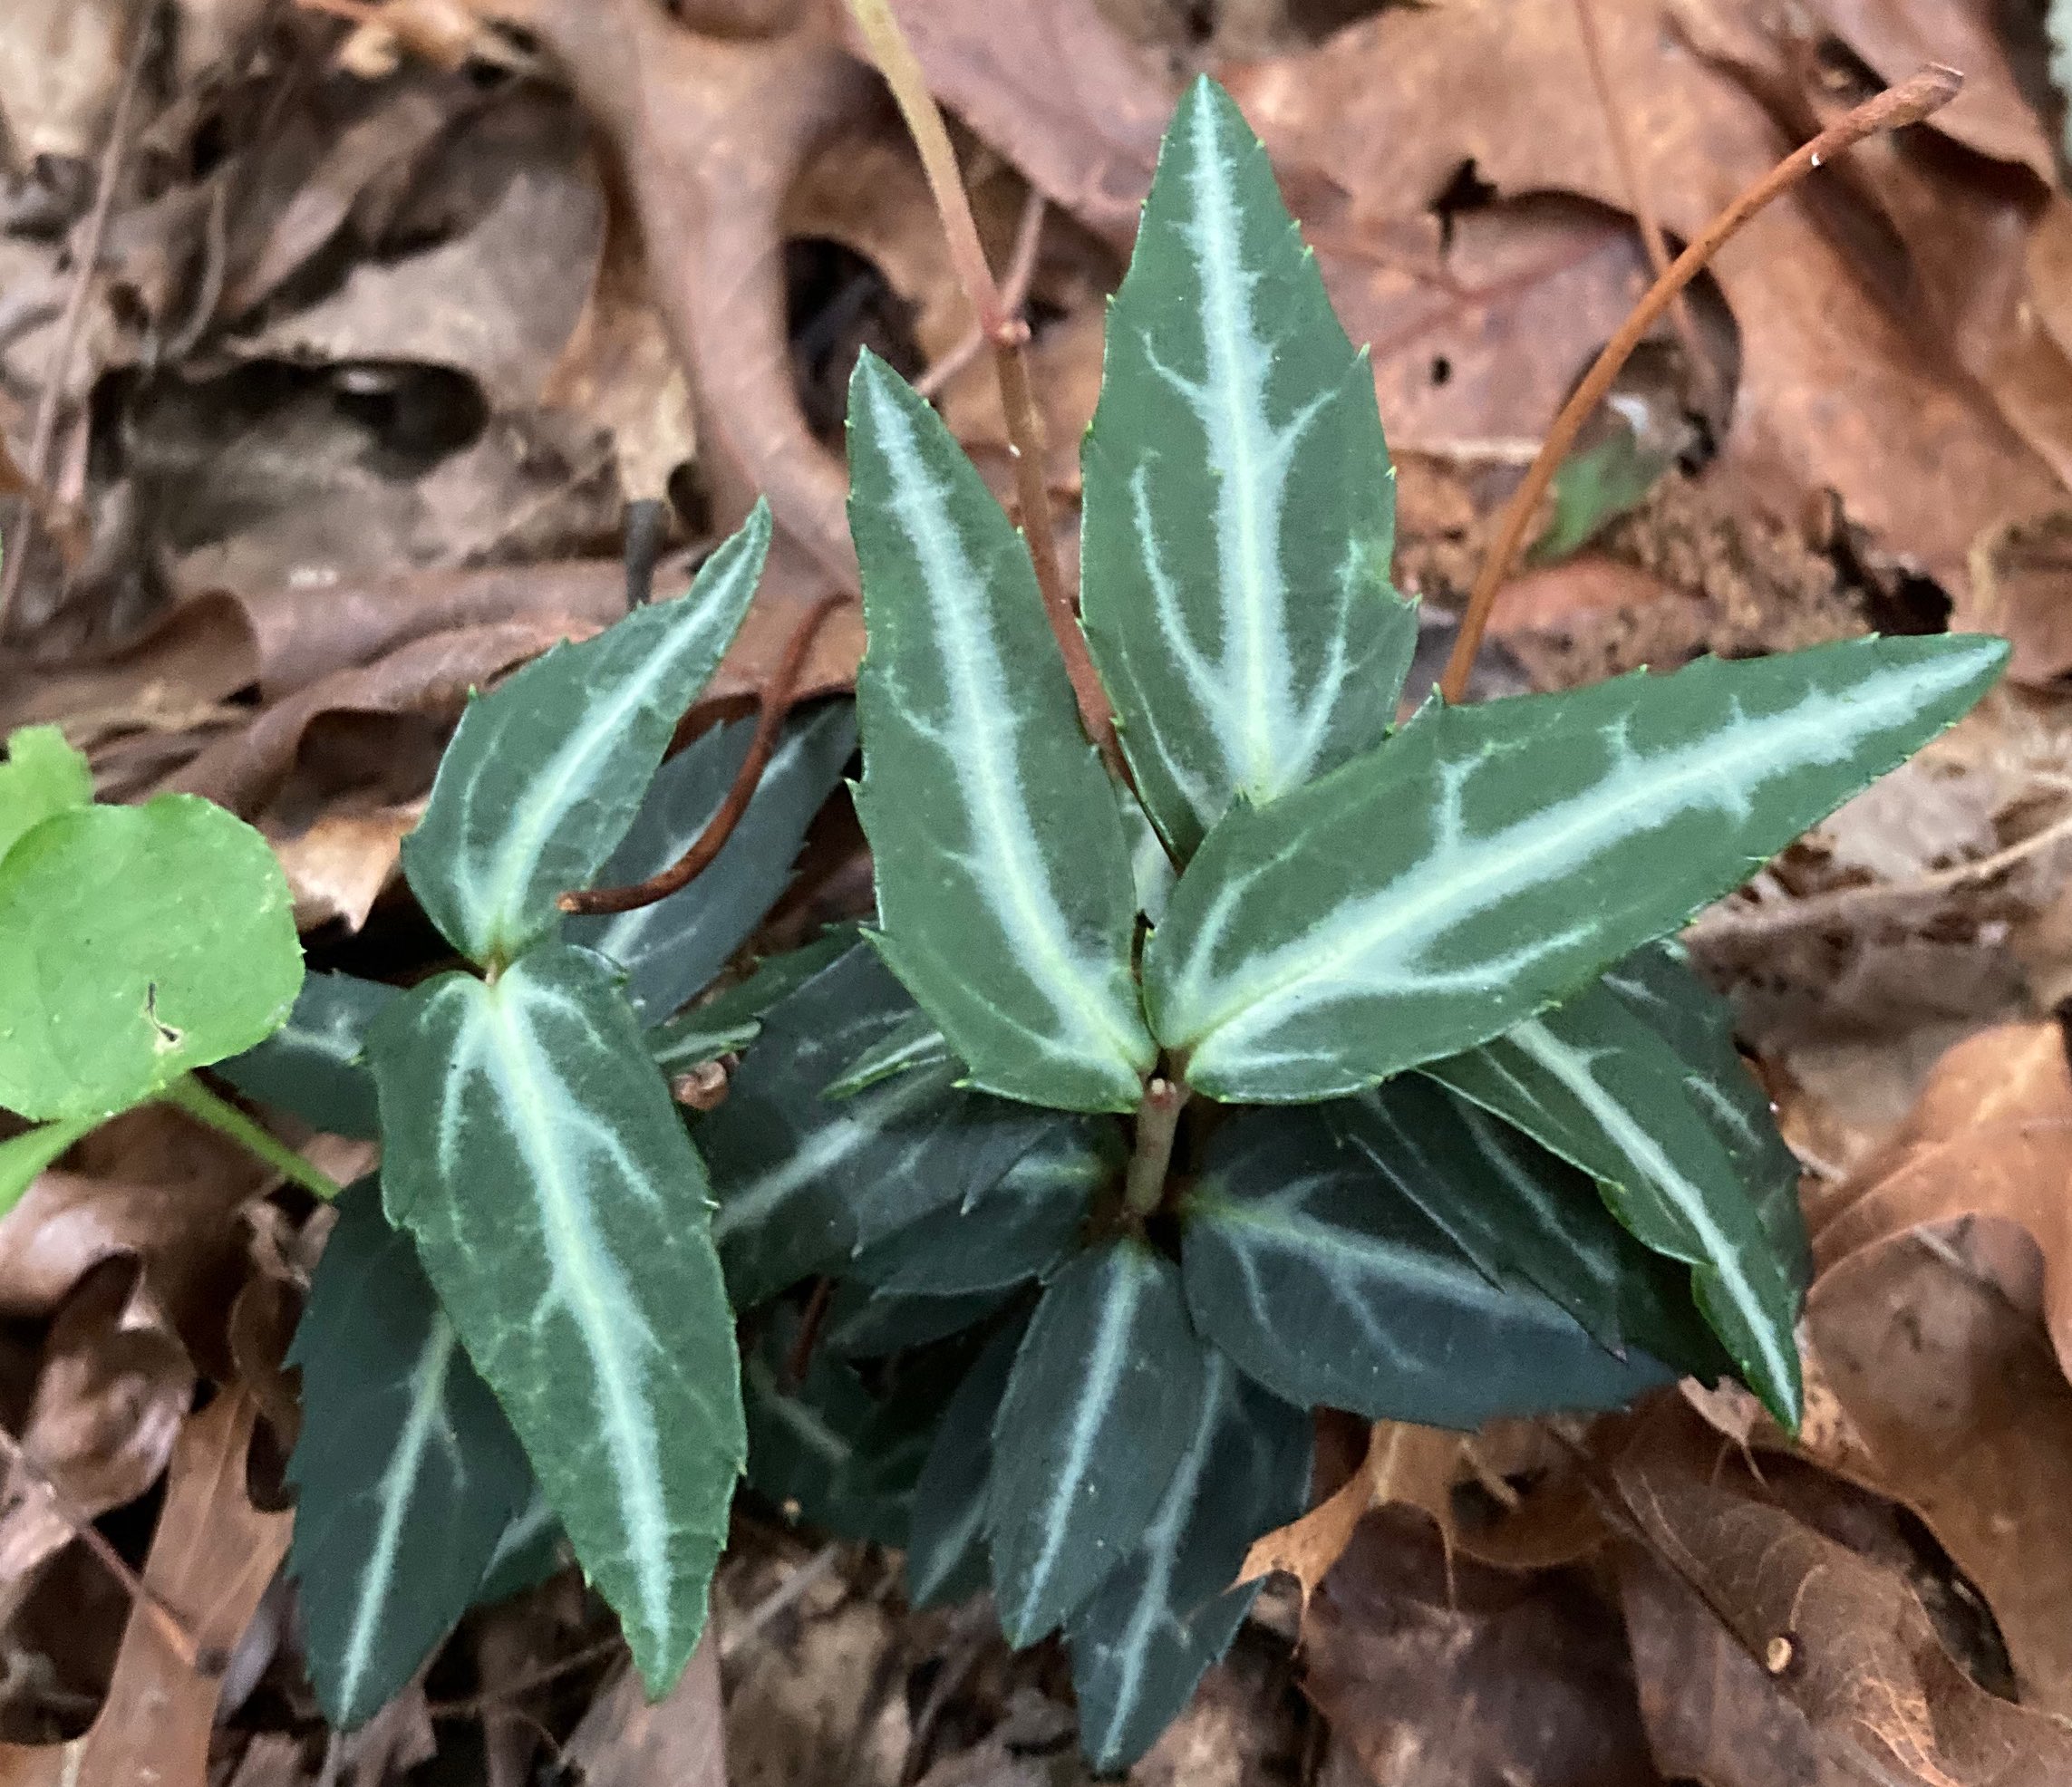 The Scientific Name is Chimaphila maculata. You will likely hear them called Striped Wintergreen, Pipsissewa. This picture shows the  Thick, leathery, dark green, variegated leaves with a number of  teeth along the margins. of Chimaphila maculata